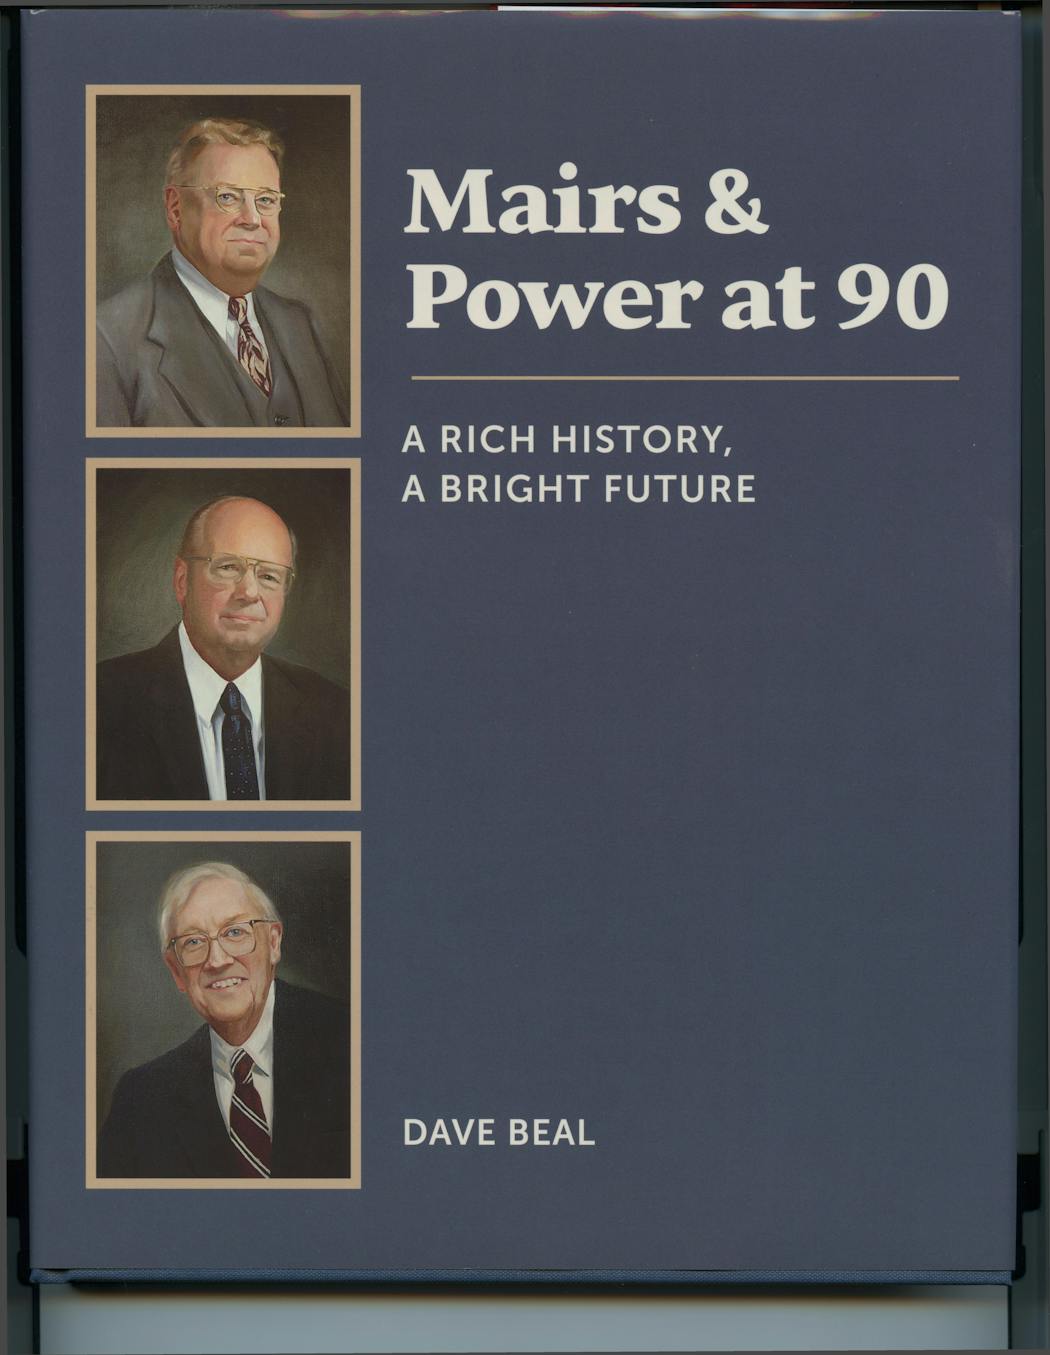 “Mairs & Power at 90: A Rich History, A Bright Future” by Dave Beal